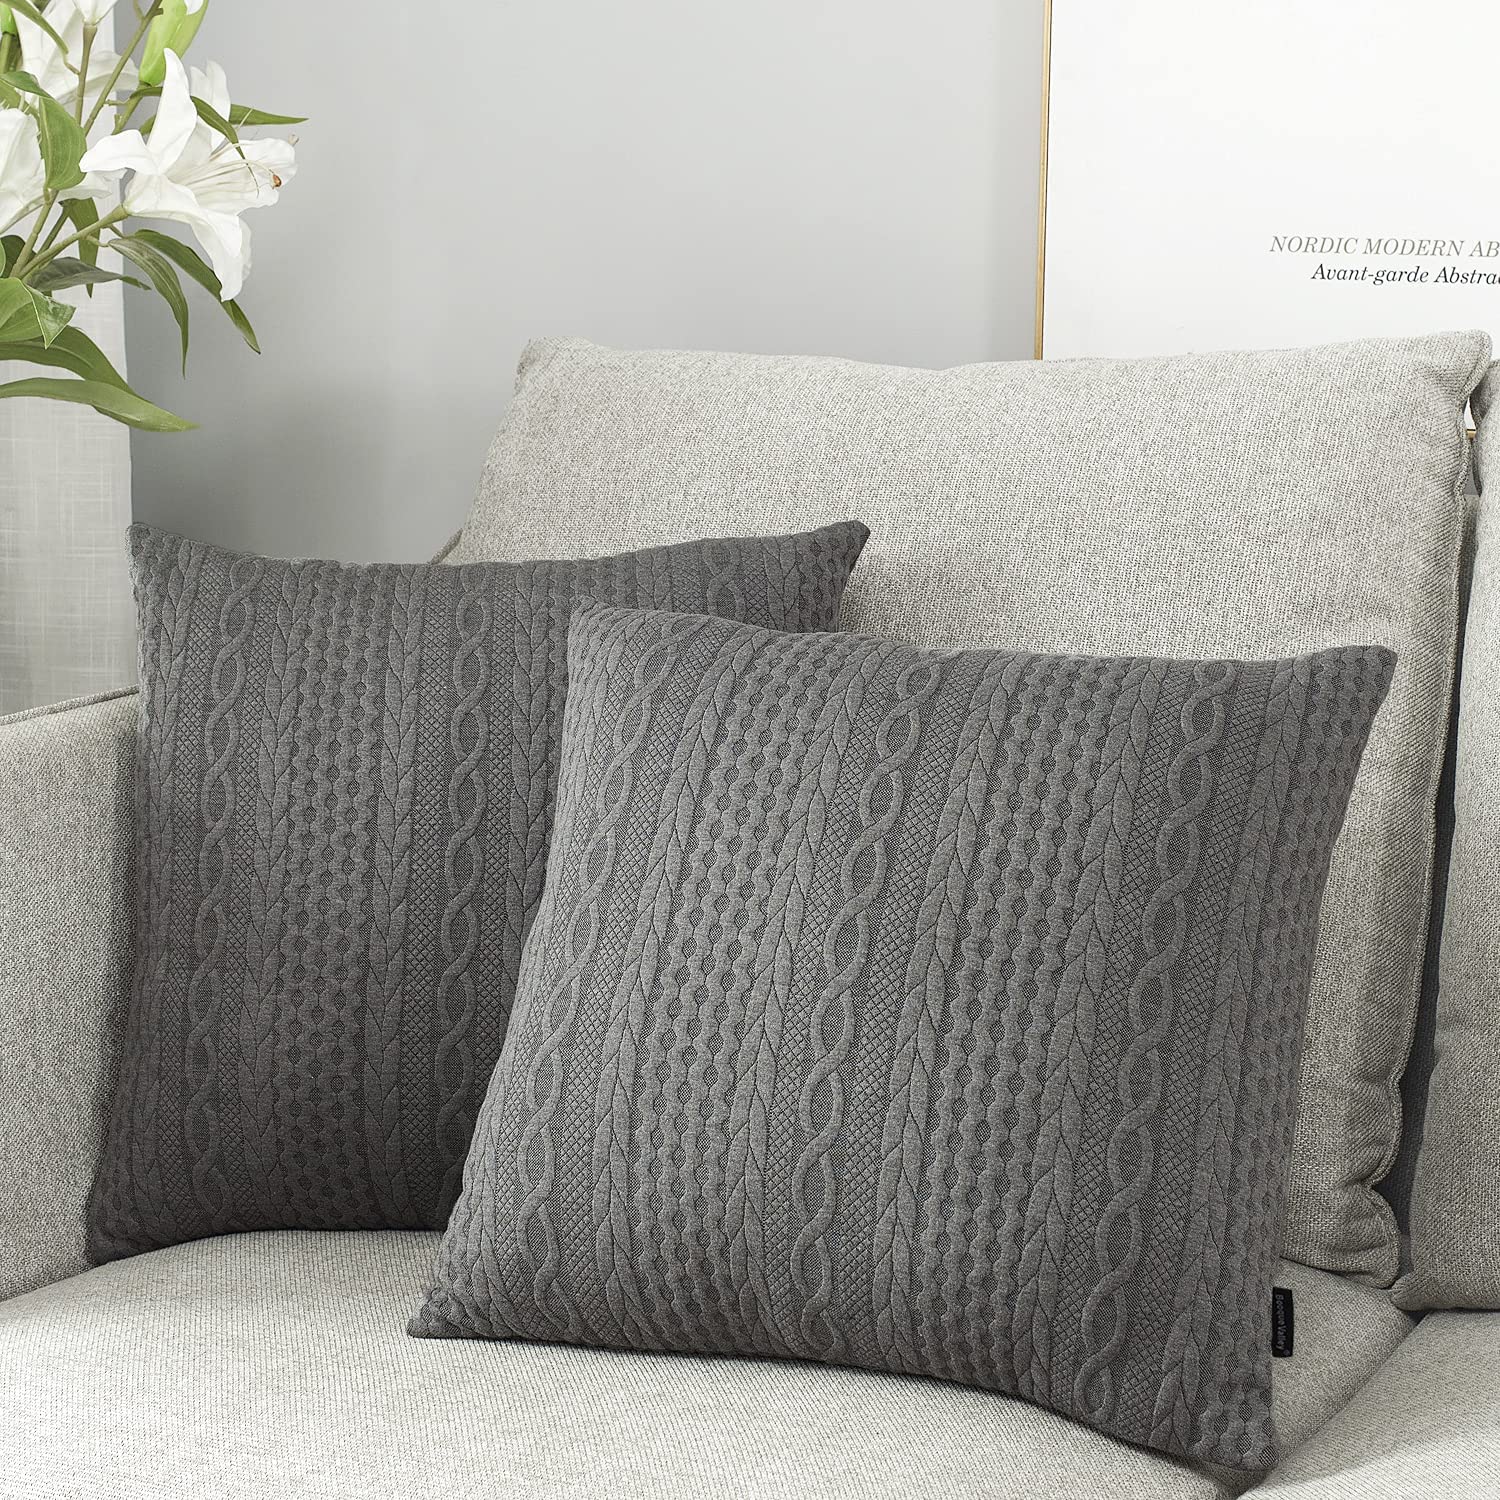 Booque Valley Knit Fabric Grey Throw Pillow Covers, 2-Pack